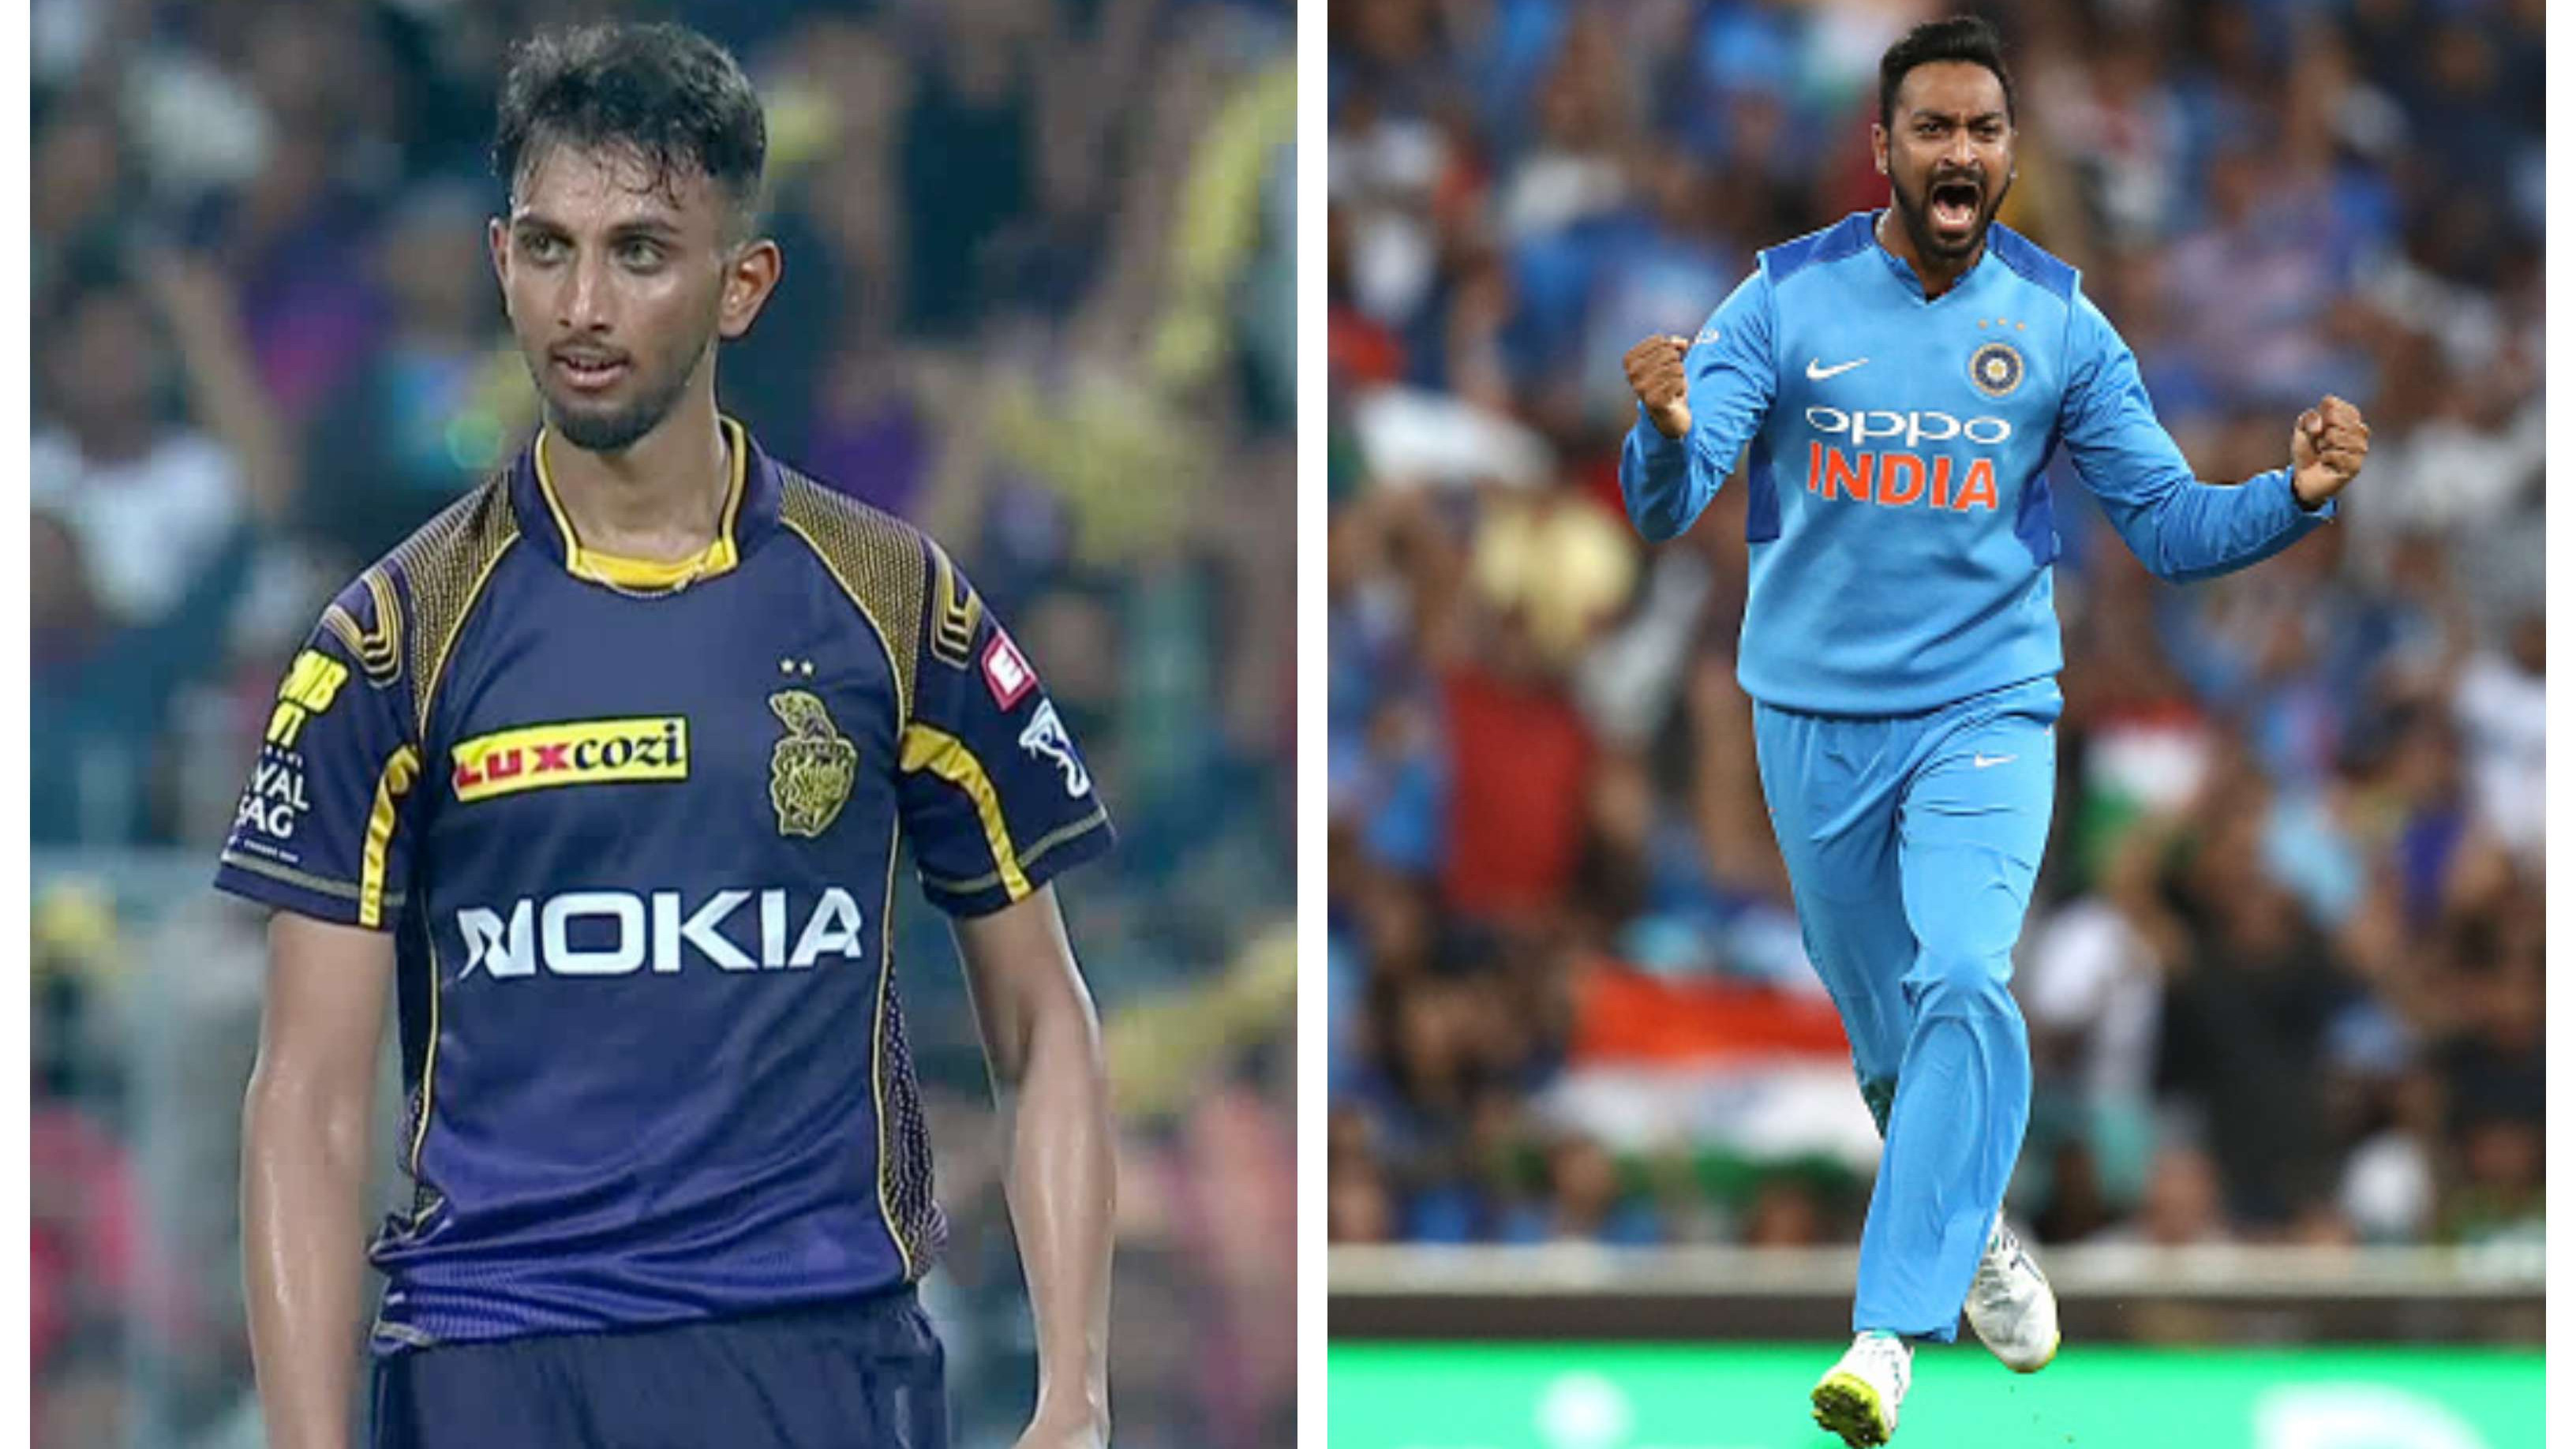 IND v ENG 2021: Prasidh Krishna, Krunal Pandya expected to receive call-up for ODI series – Report